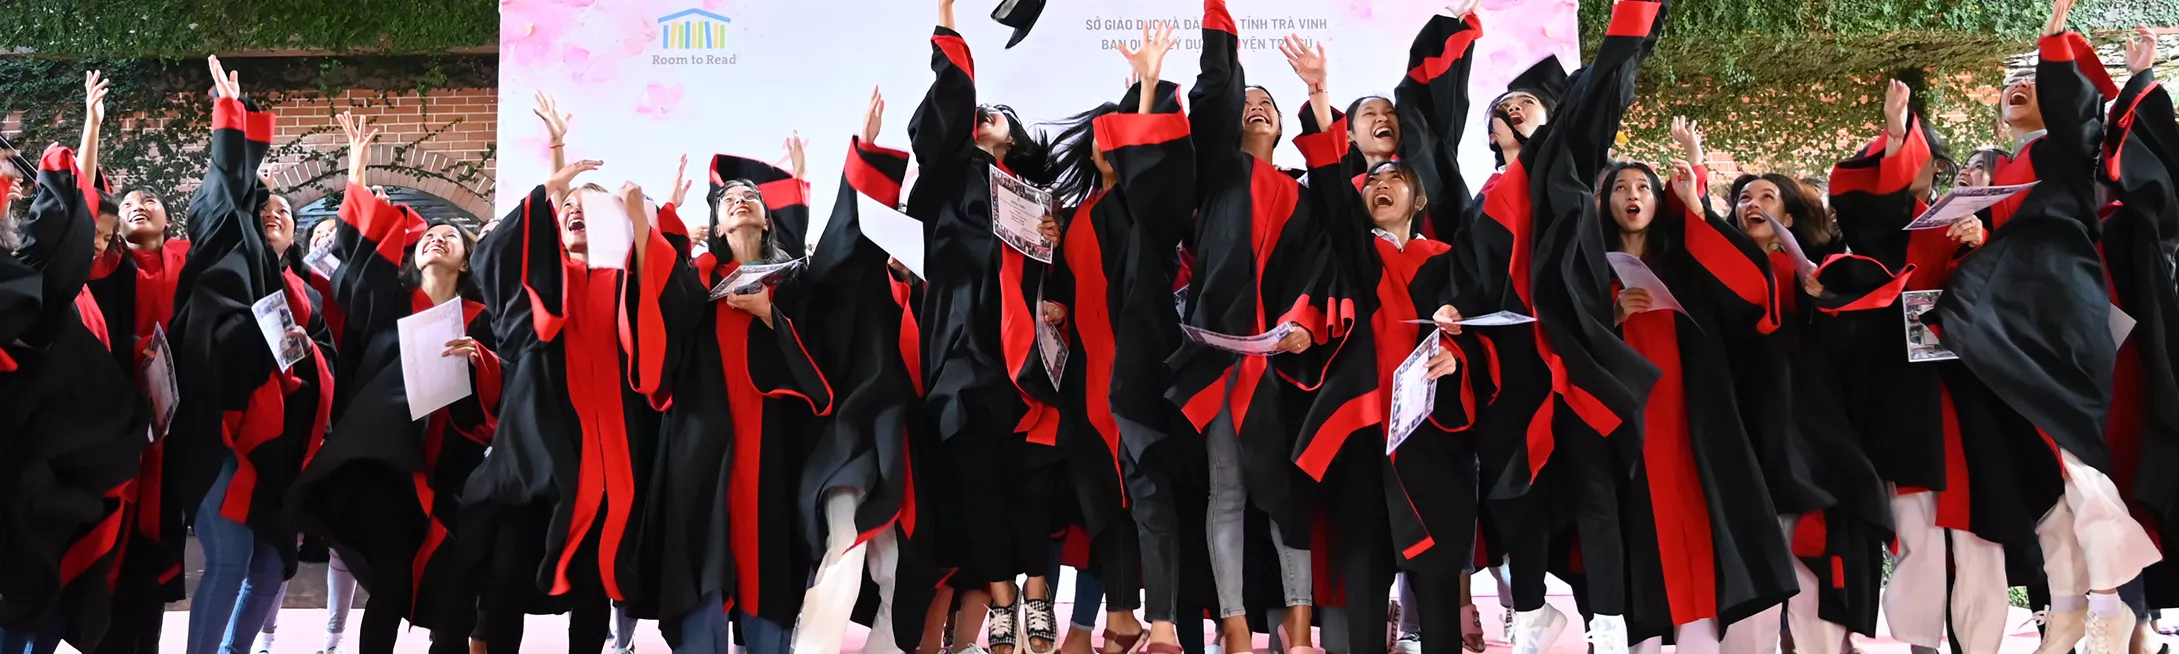 Group of Vietnamese girls in graduation robes throwing graduation caps in the air